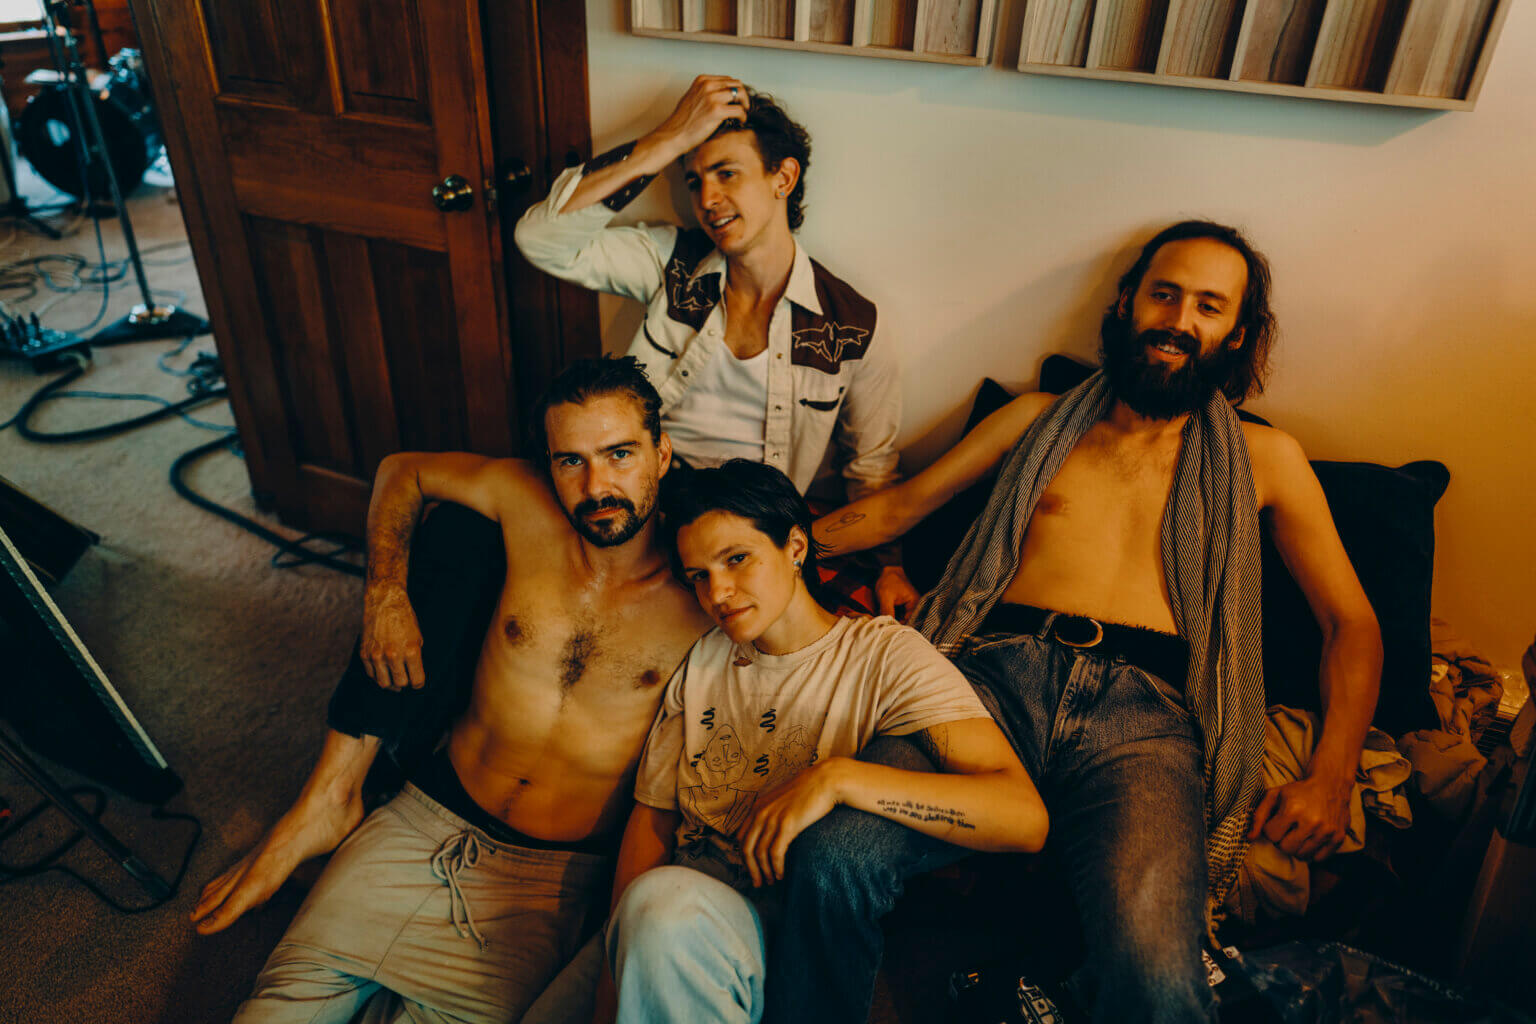 Big Thief have dropped two new songs, “Little Things” and “Sparrow”